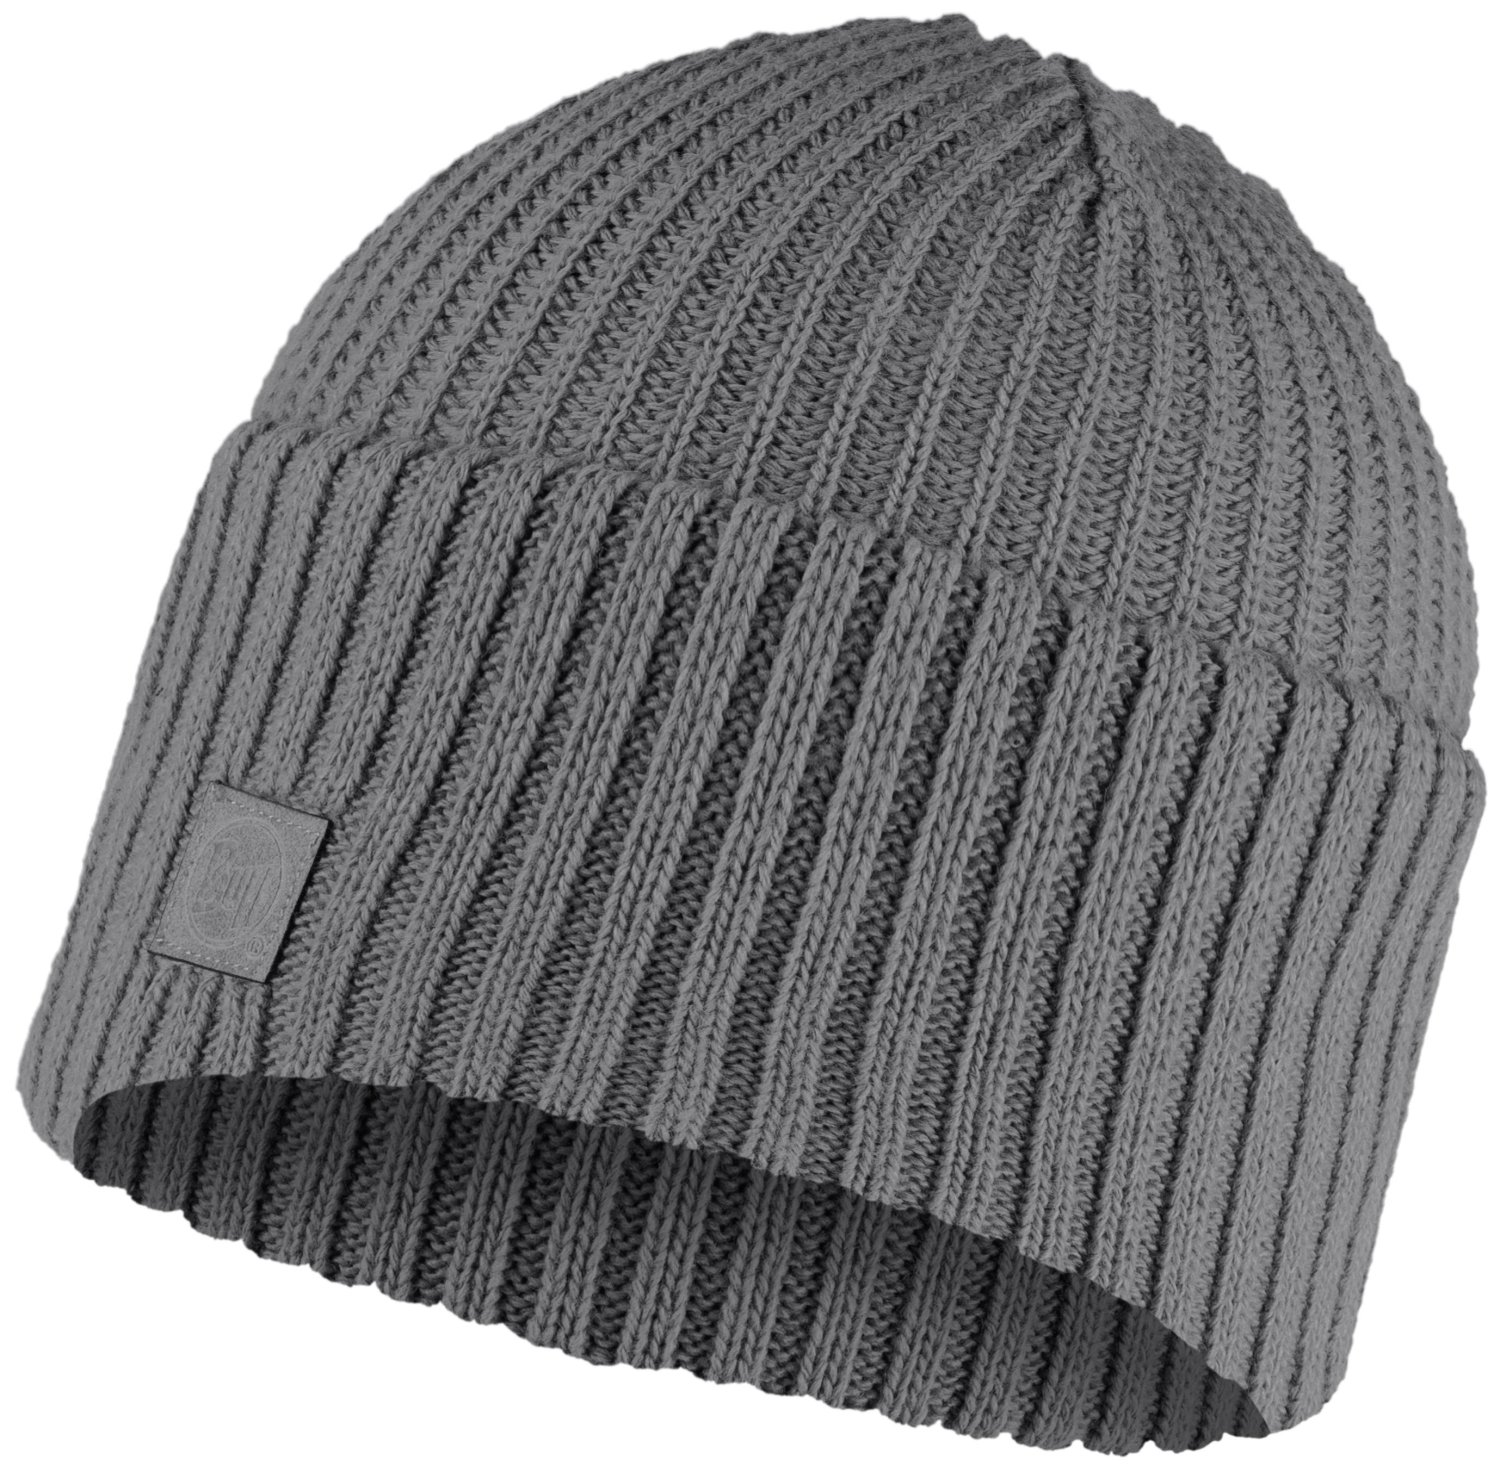 Шапка Buff Knitted Hat Rutger Grey Heather US:one size, 129694.938.10.00